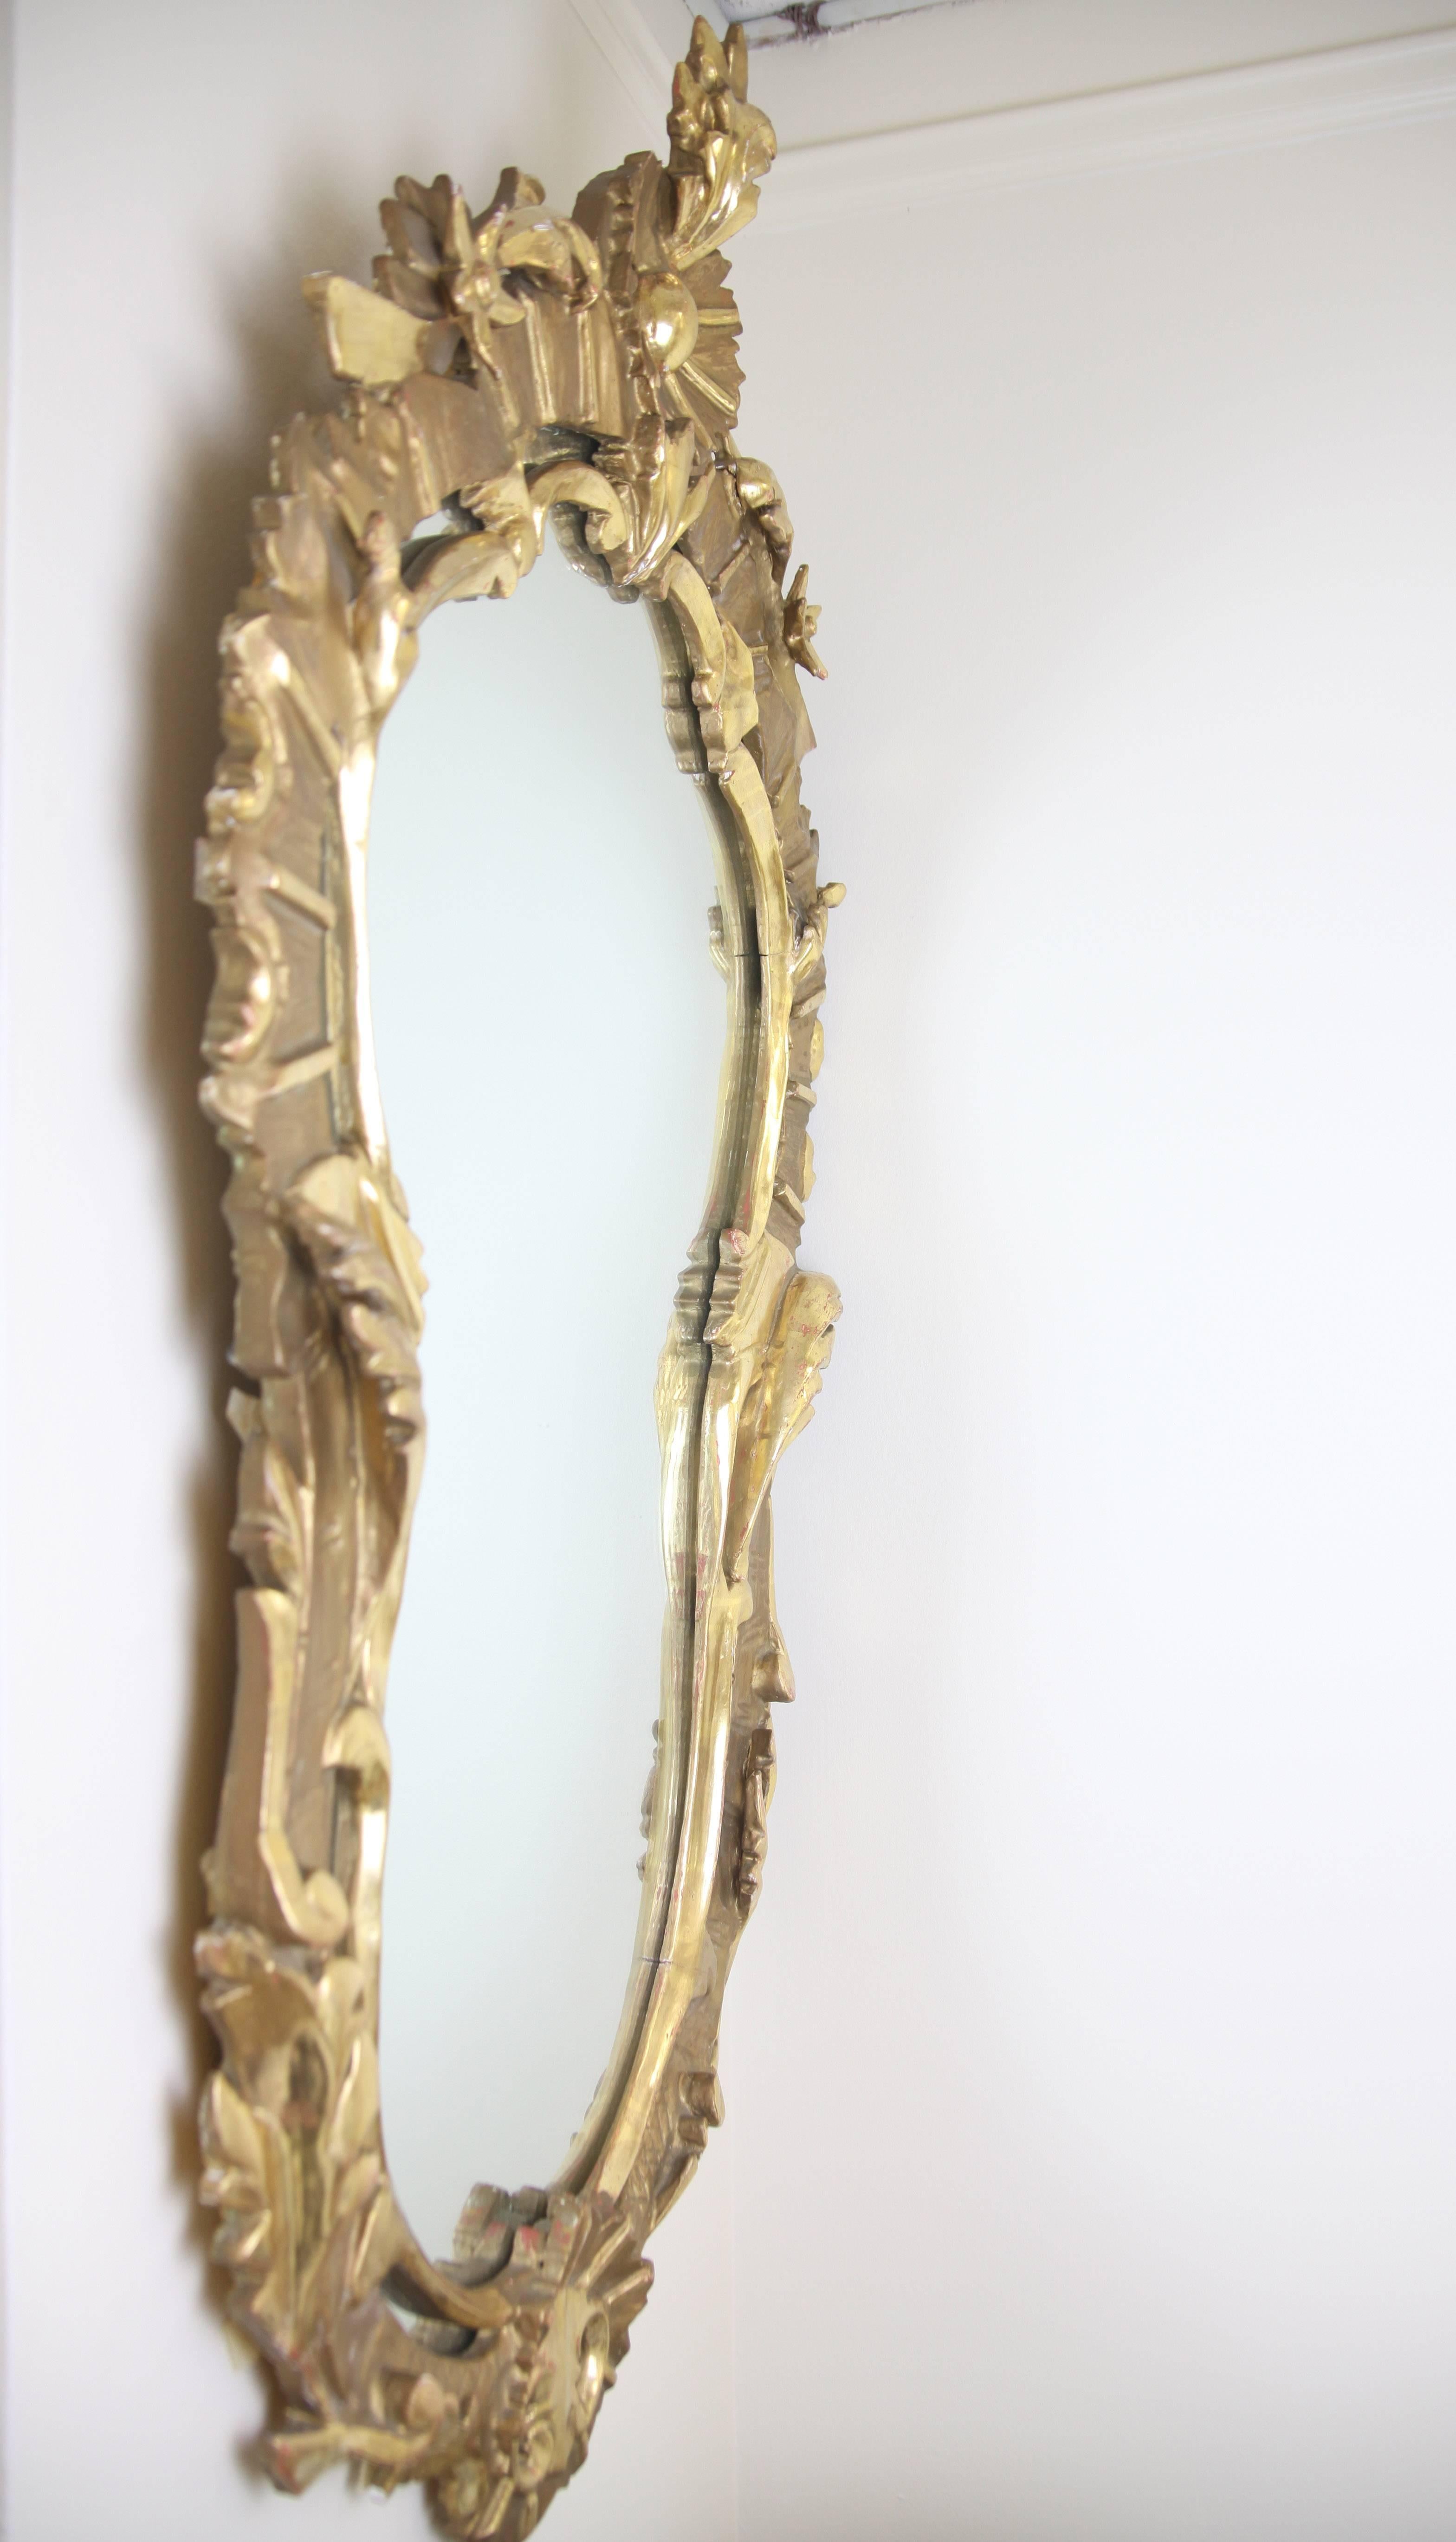 This very unusual mirror features beautiful water gilding as well as the more traditional giltwood finish. The origin of this mirror is unknown but is likely French or Italian.